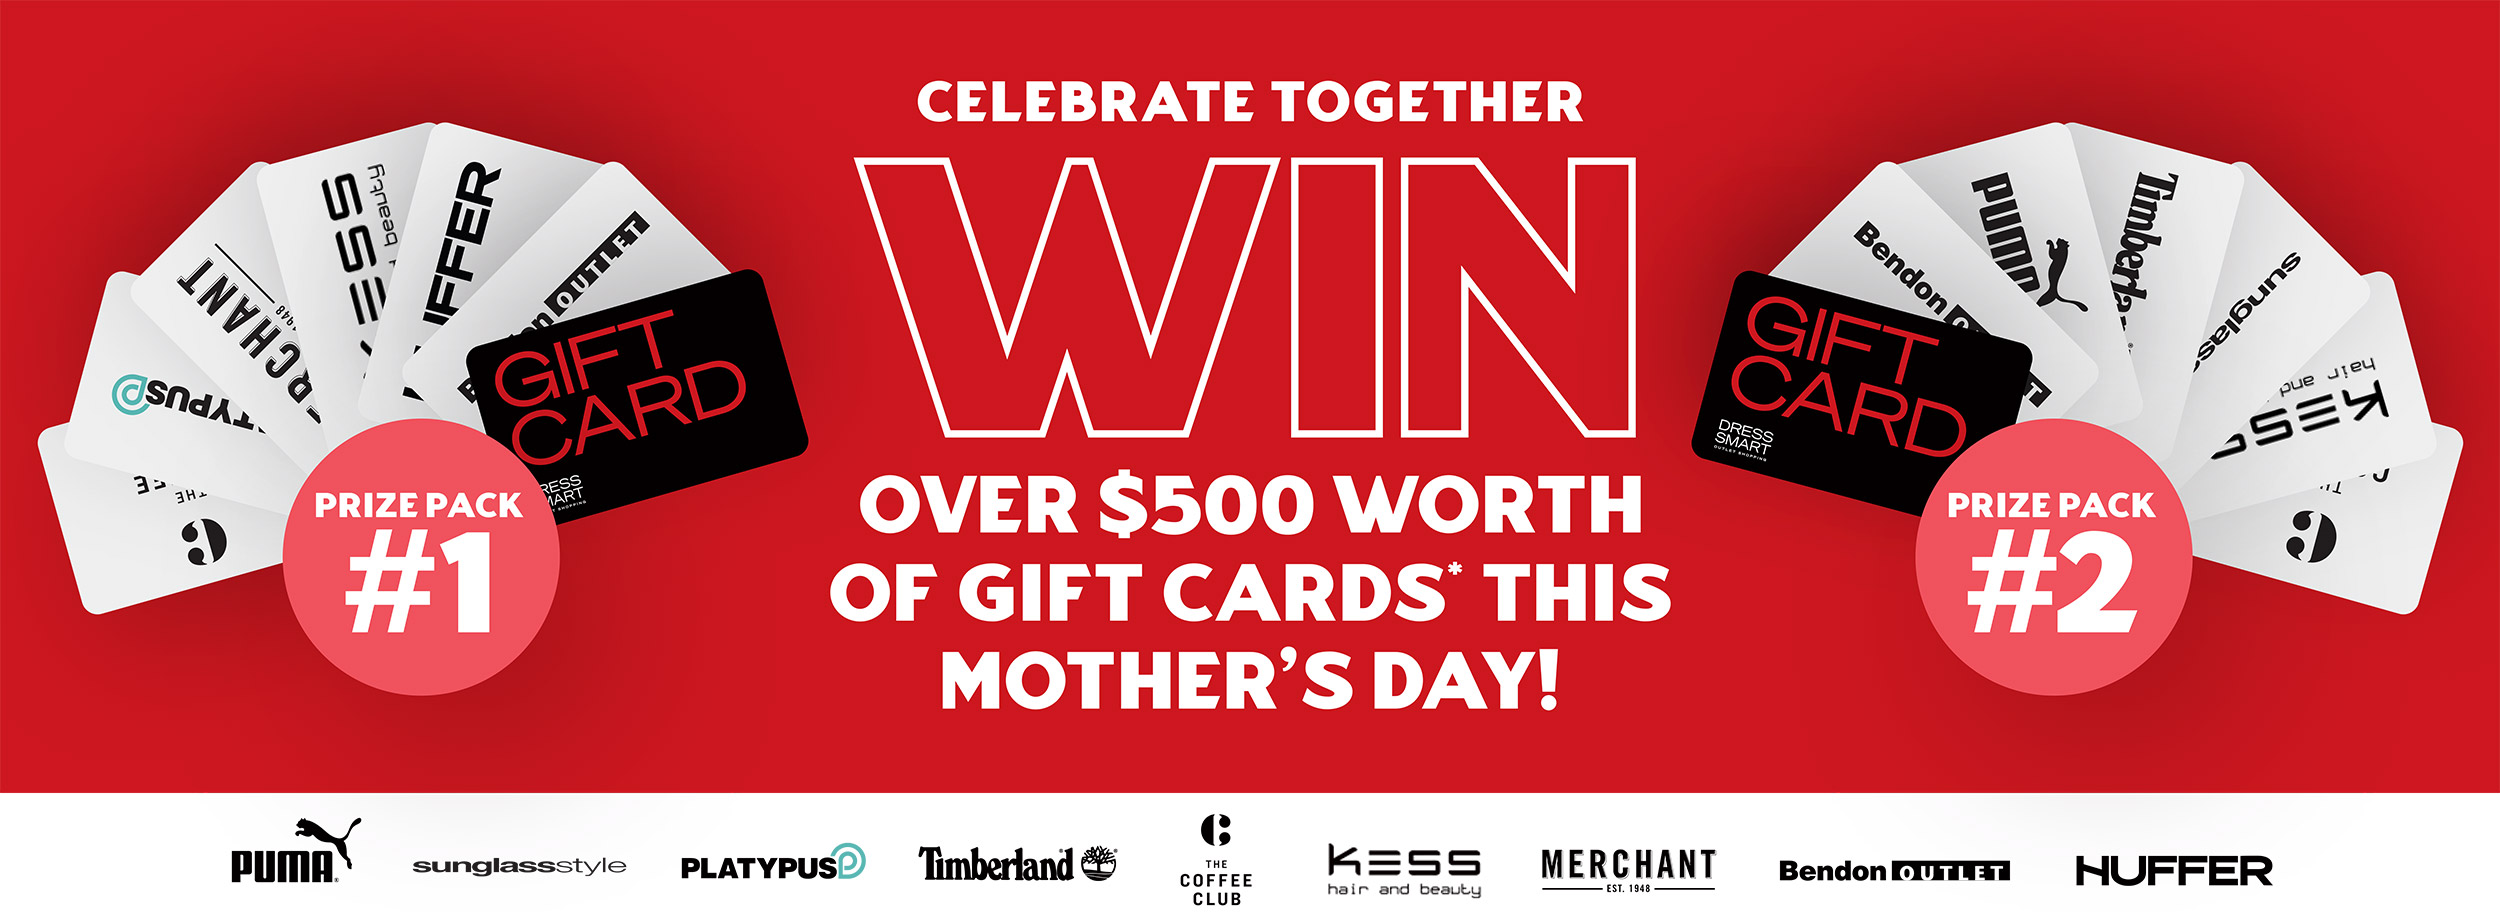 Celebrate together and win over $500 worth of gift cards this mother’s day!